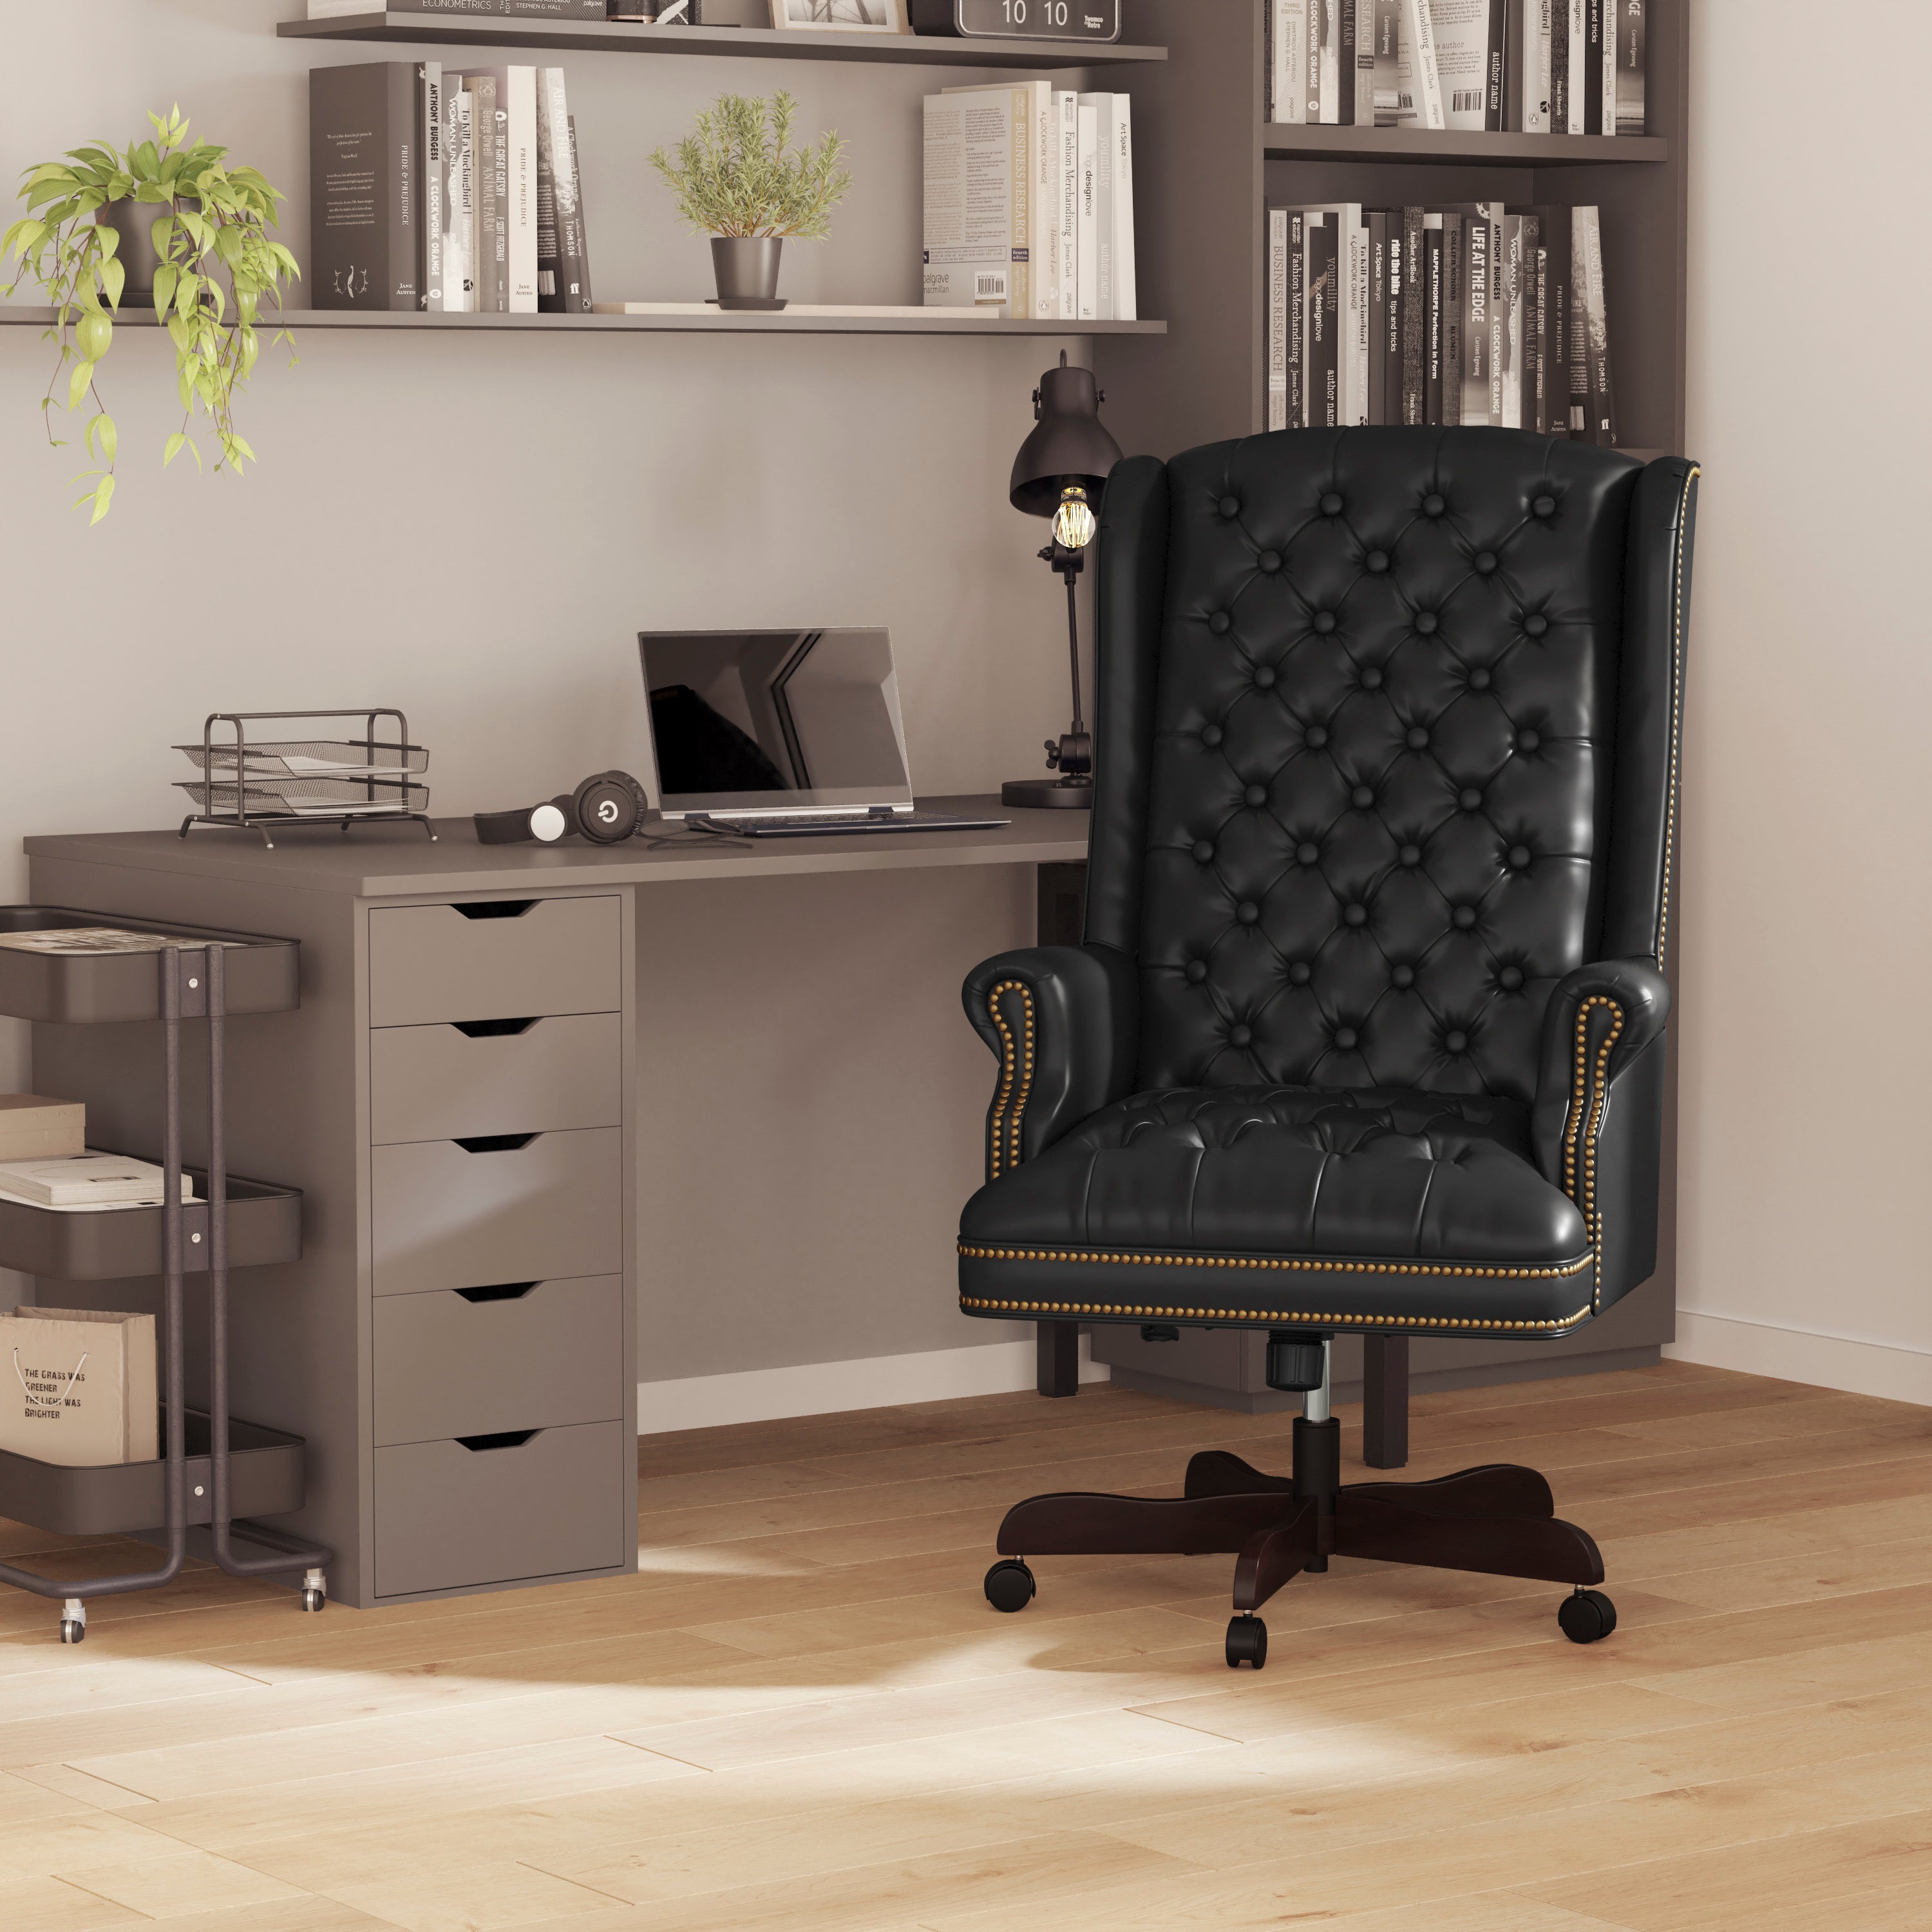 High Back Traditional Fully Tufted LeatherSoft Executive Swivel Ergonomic Office Chair with Arms-Office Chair-Flash Furniture-Wall2Wall Furnishings